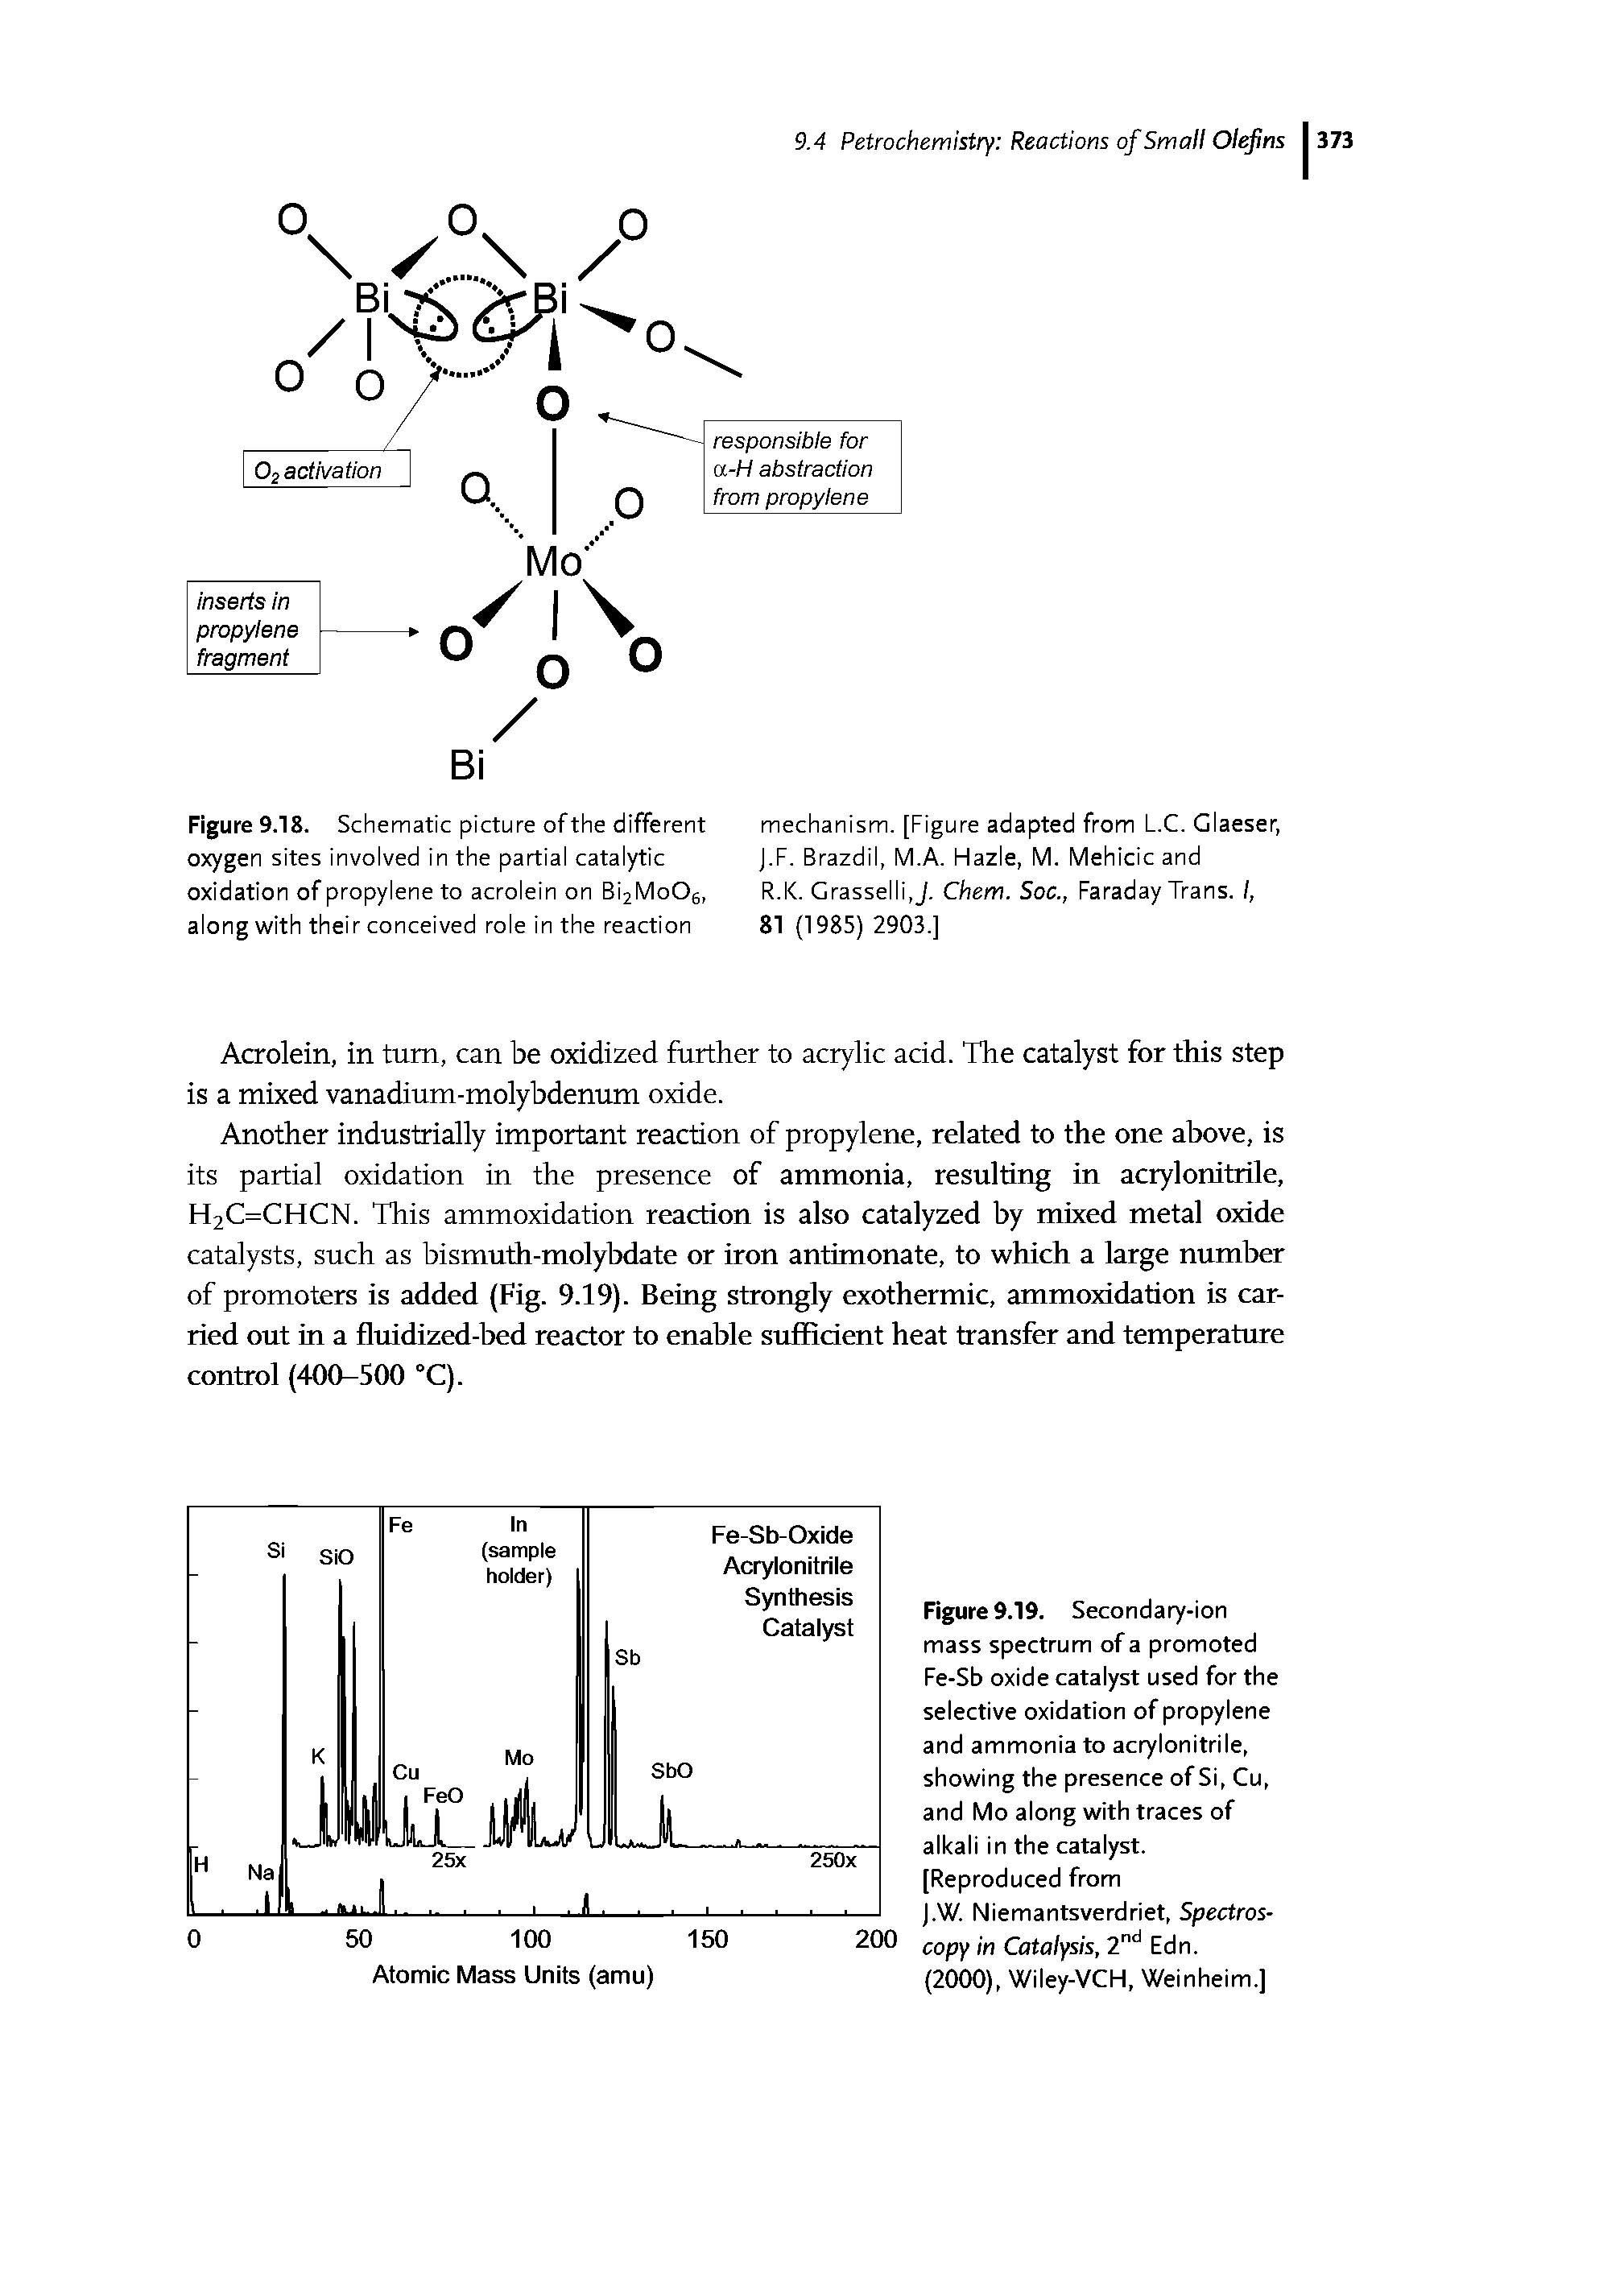 Figure 9.19. Secondary-ion mass spectrum of a promoted Fe-Sb oxide catalyst used for the selective oxidation of propylene and ammonia to acrylonitrile, showing the presence of Si, Cu, and Mo along with traces of alkali in the catalyst. [Reproduced from J.W. Niemantsverdriet, Spectres-200 gpy jfj Catalysis, 2" Edn.